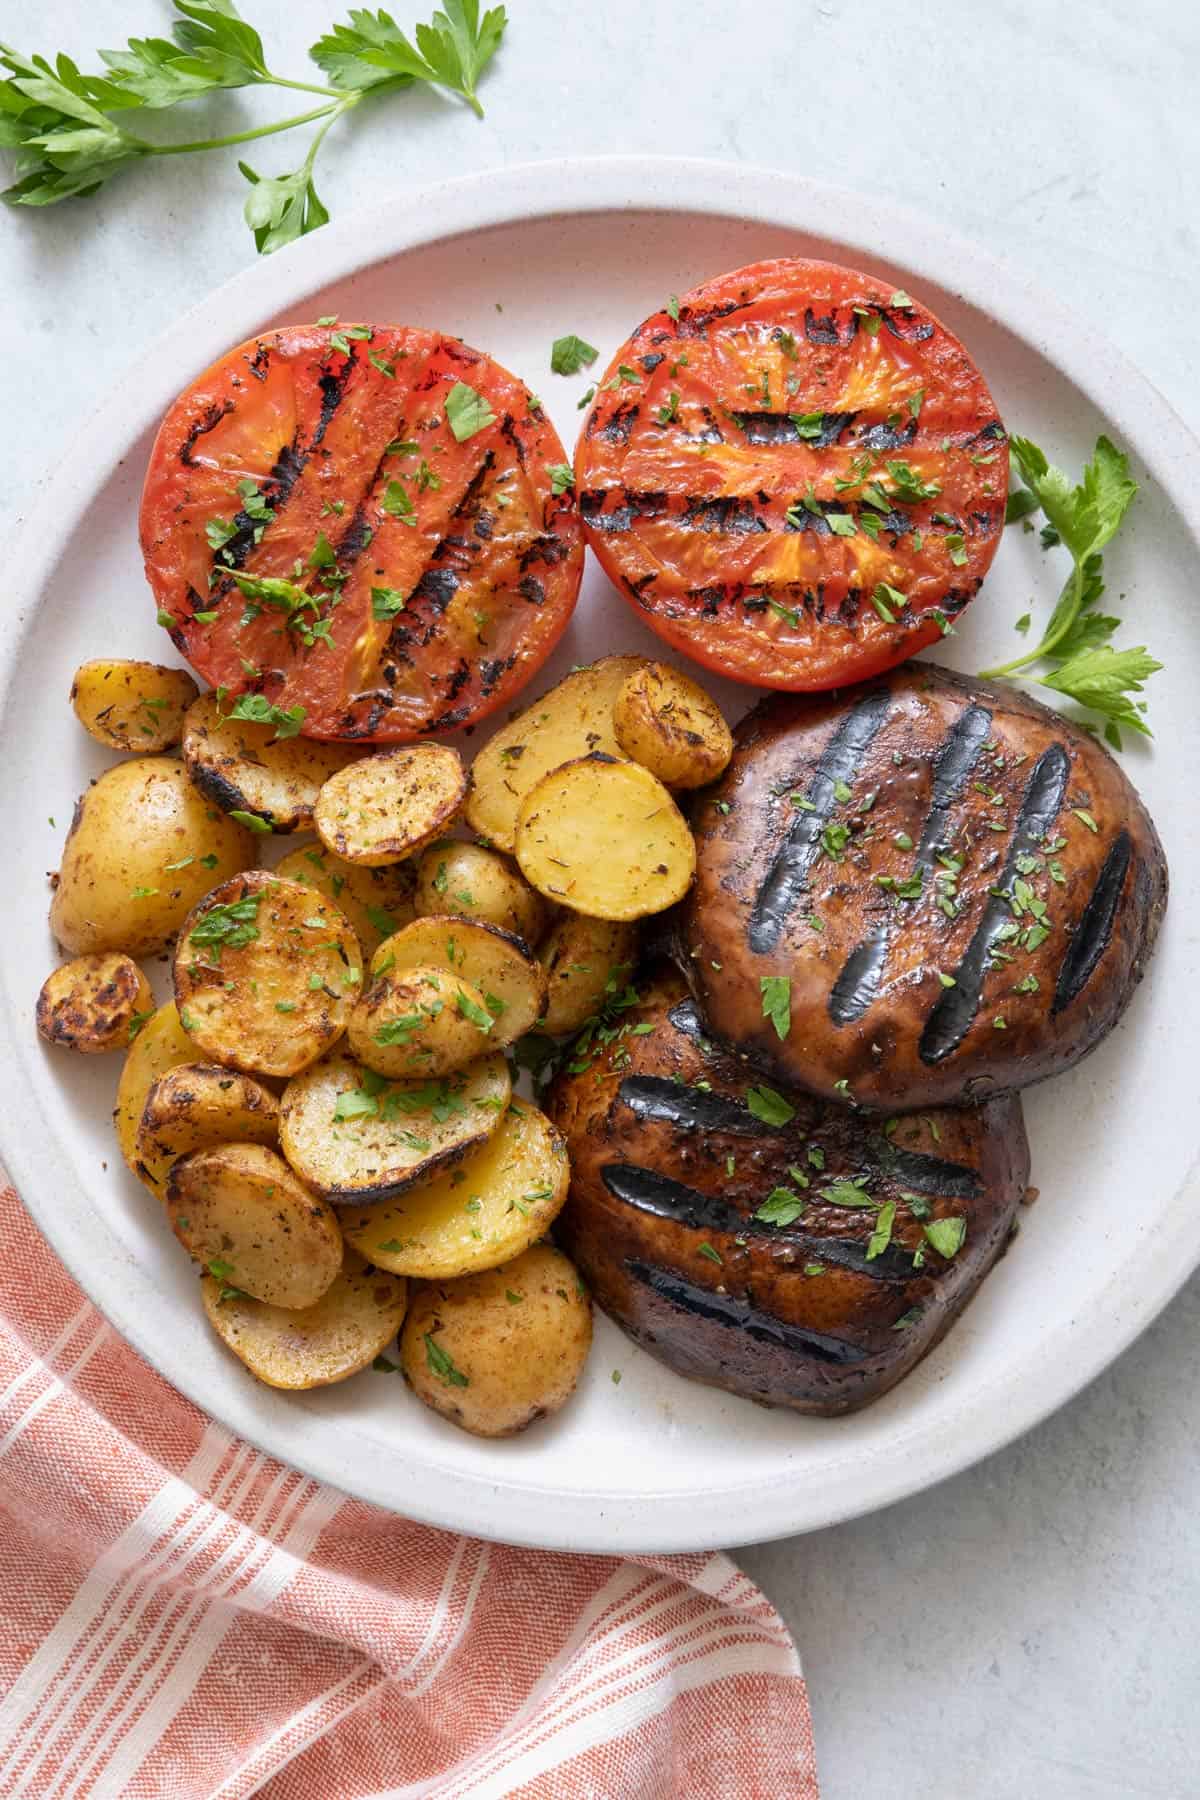 Large white plate with grilled tomatoes, grilled mushrooms, and grilled potatoes, garnished with parsley.